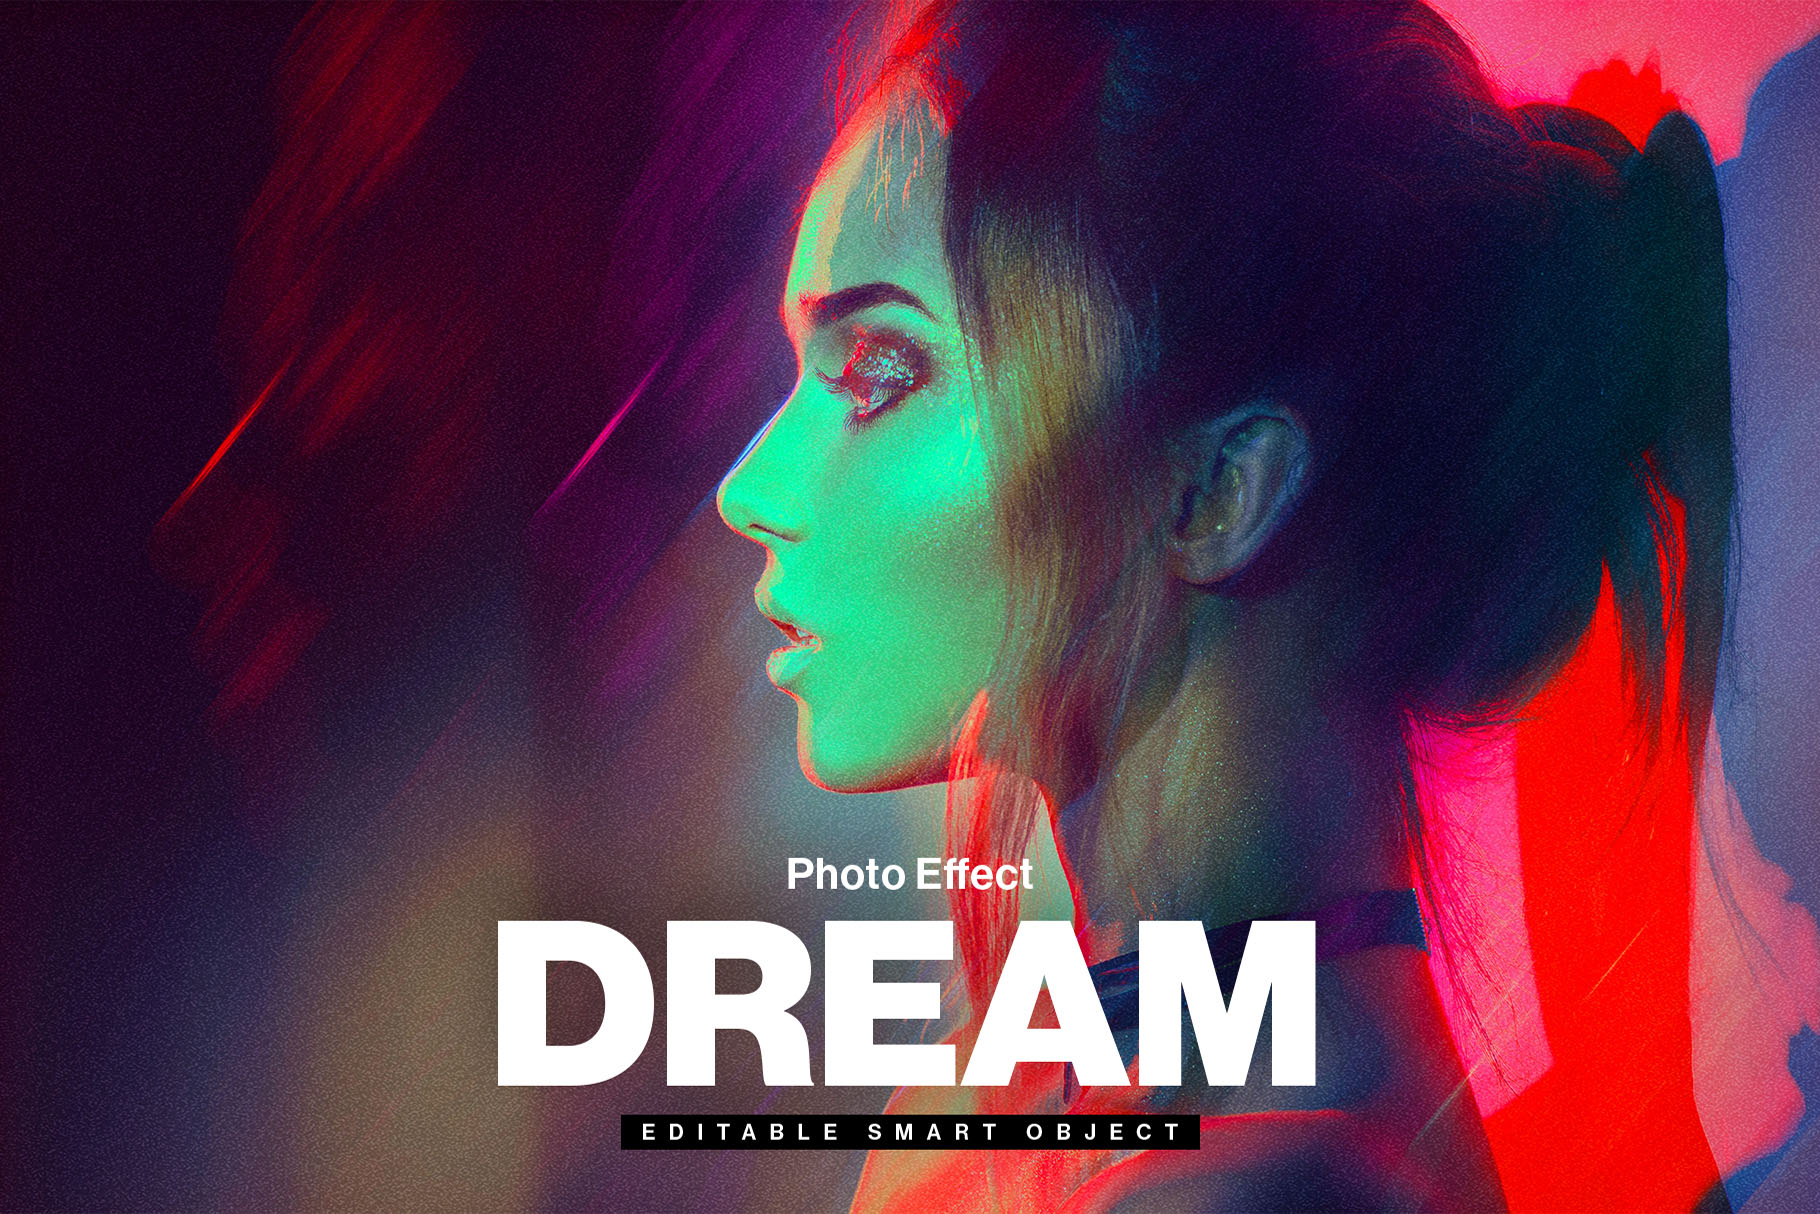 Dream Photo Effect Template in Photoshop PSD